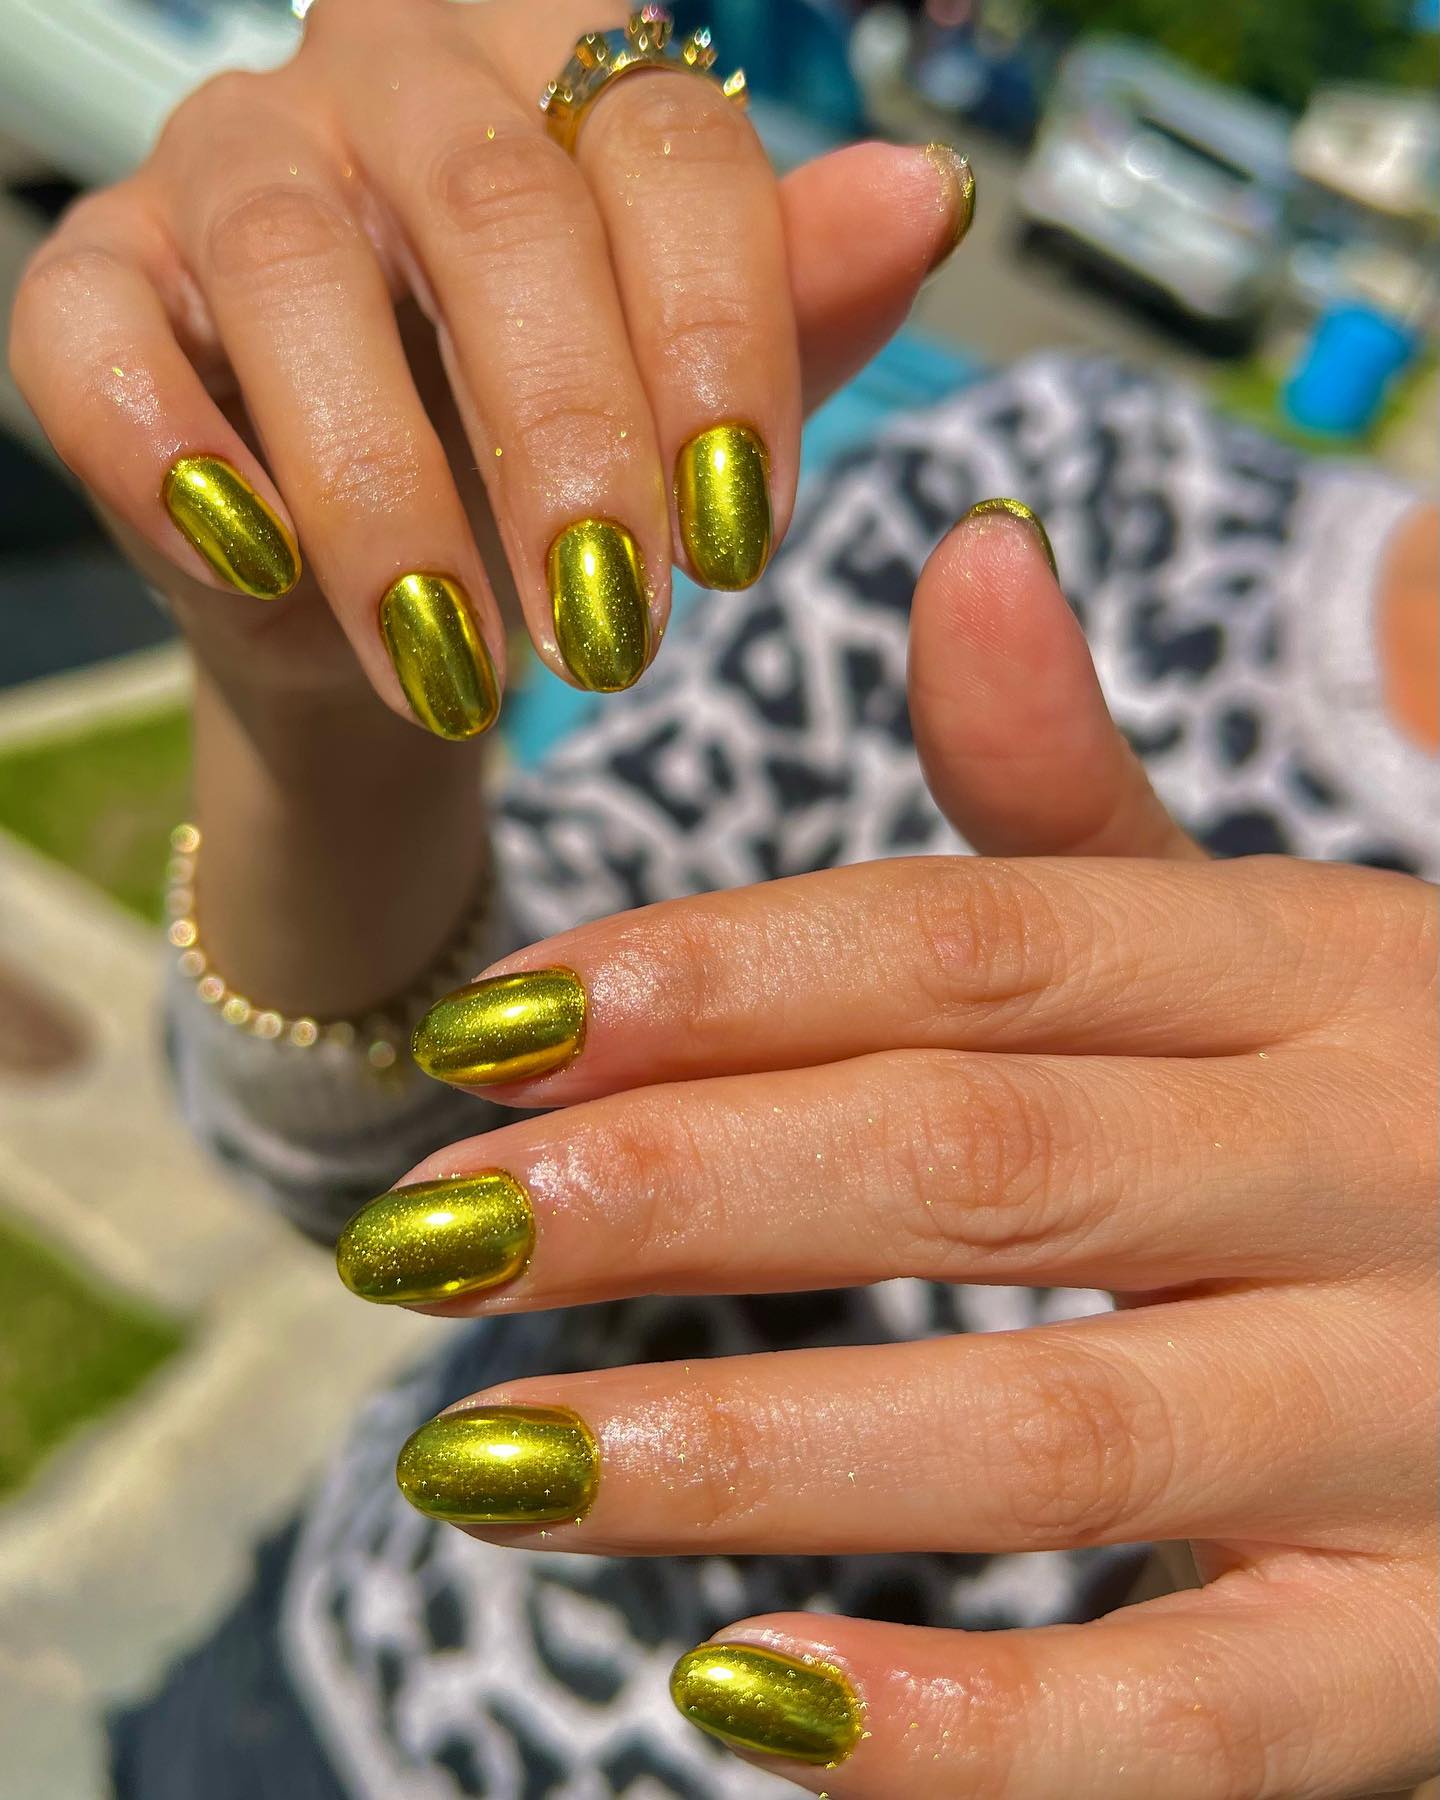 If you're looking for something that's subtle, but still noticeable, then green metallic nails are the way to go. They're also very durable, so you can rock them for weeks without worrying about chipping or cracking.